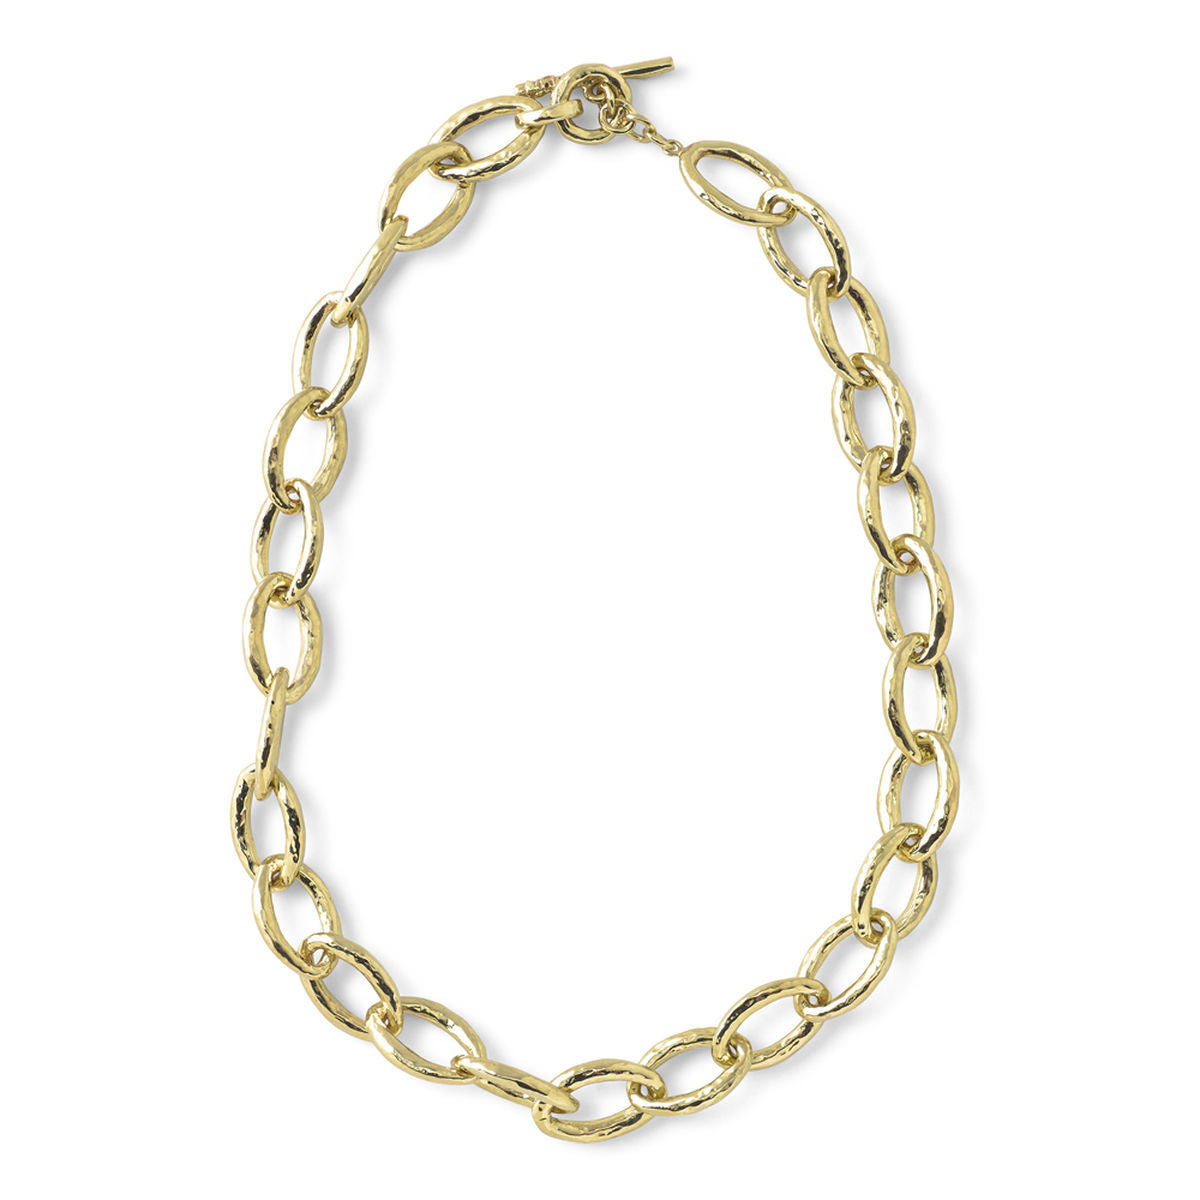 Bastille Necklace in Yellow Gold